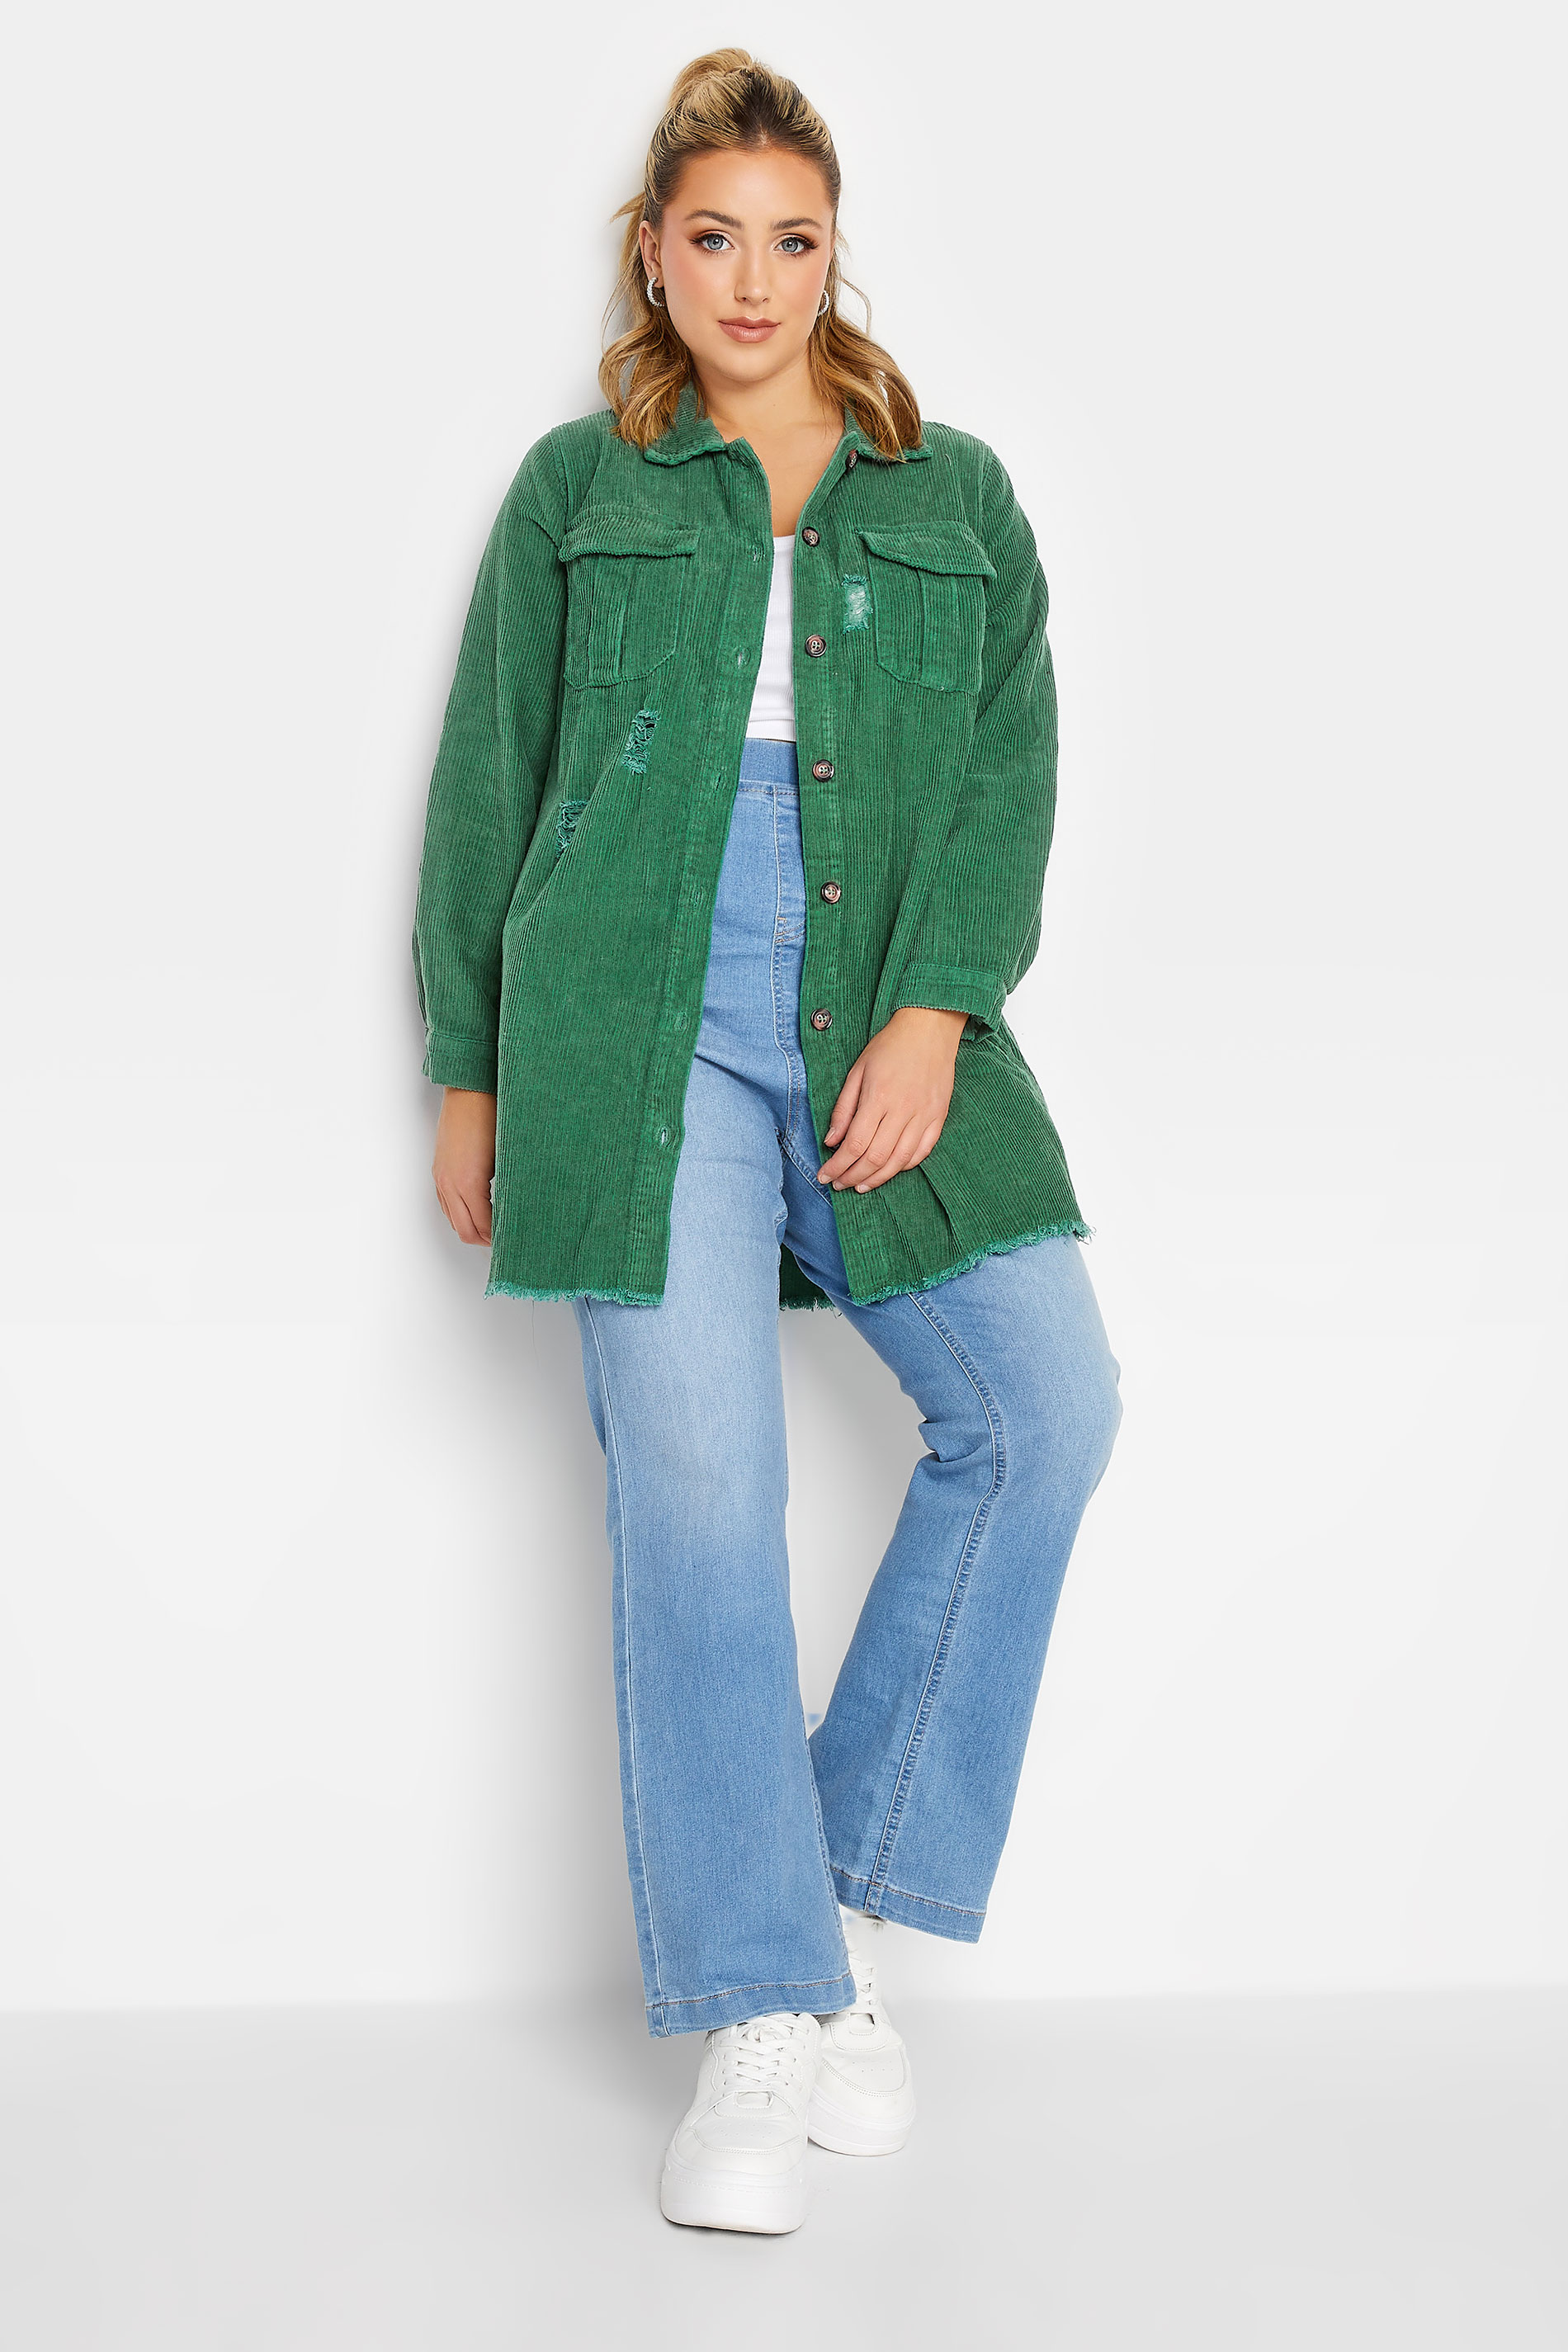 LIMITED COLLECTION Plus Size Green Ripped Cord Shacket | Yours Clothing 2